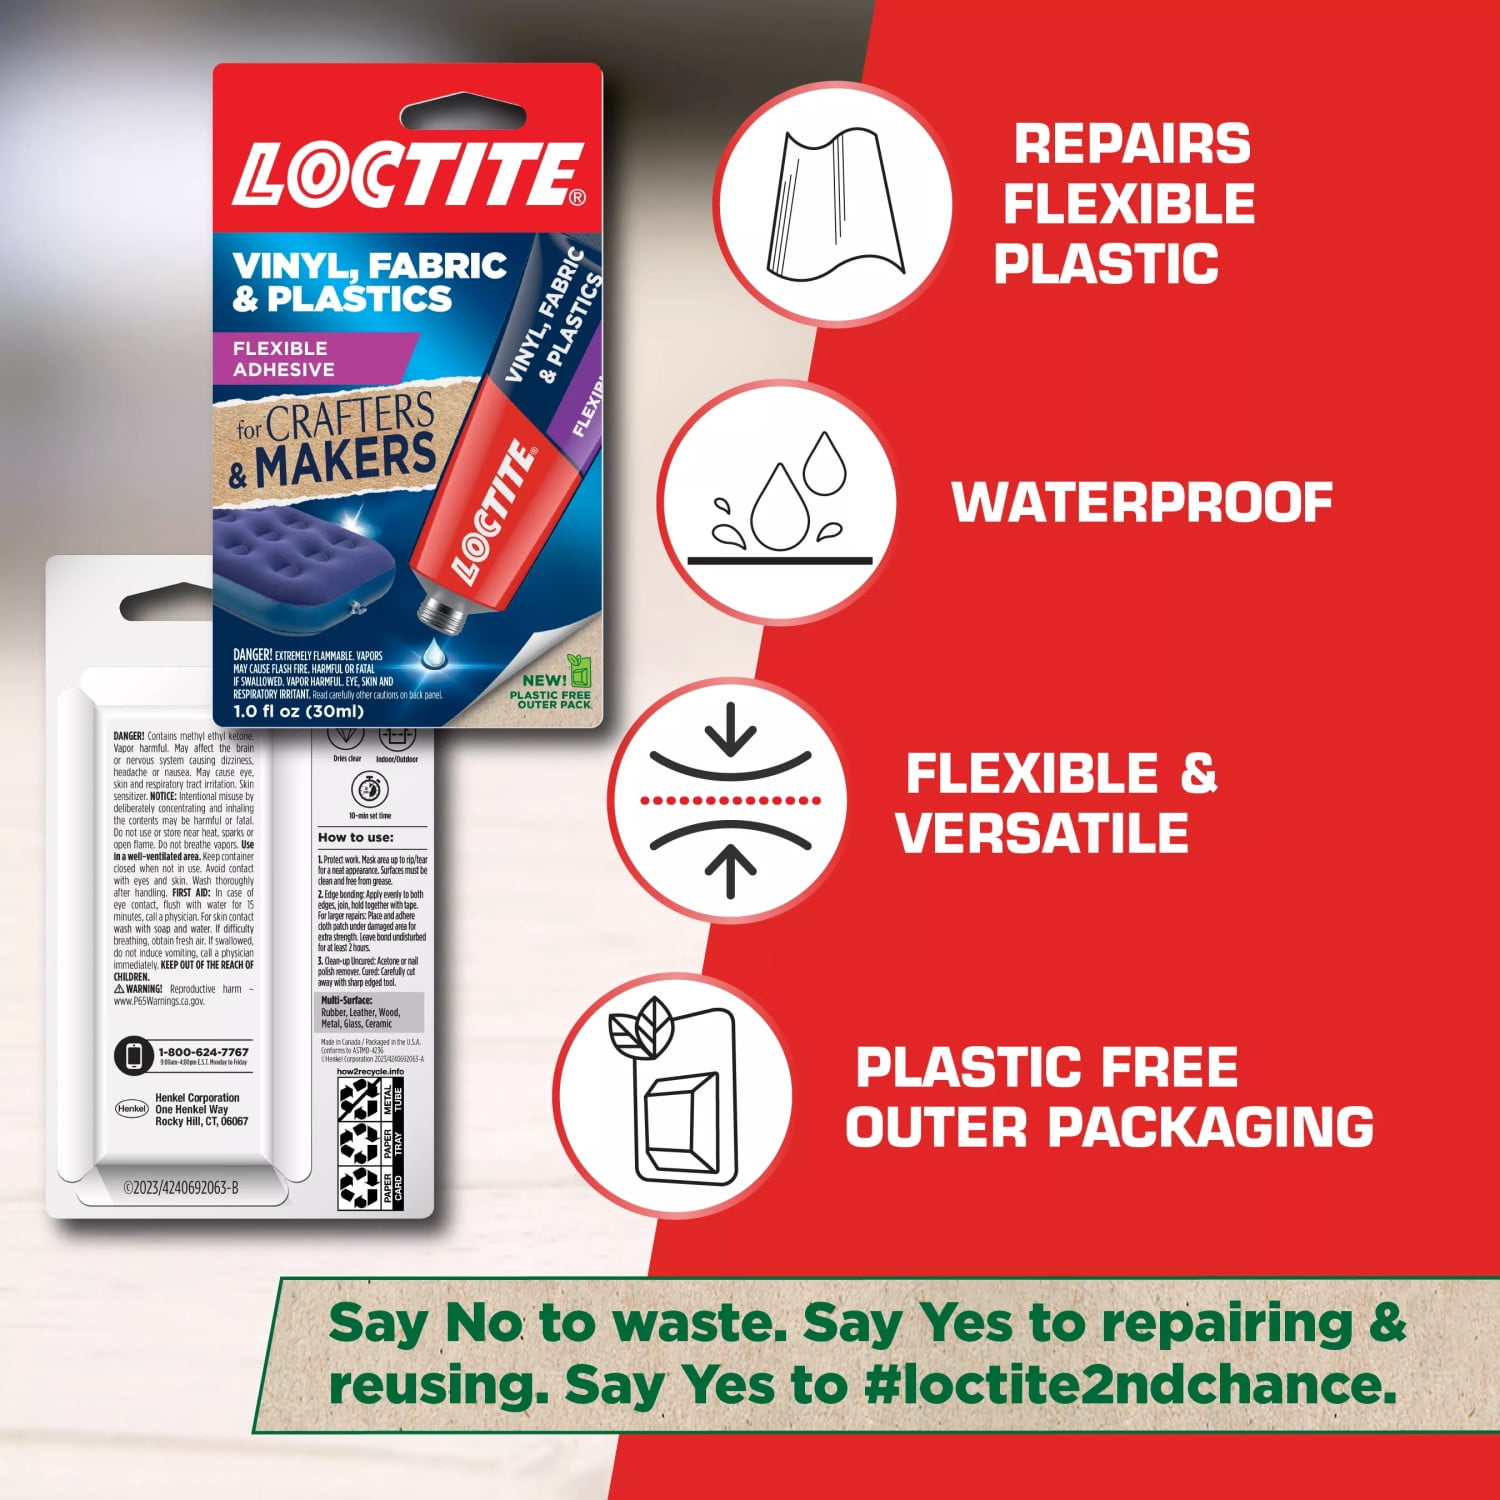 Loctite Vinyl, Fabric, and Plastic Flexible Adhesive, 1 Ounce - 3count